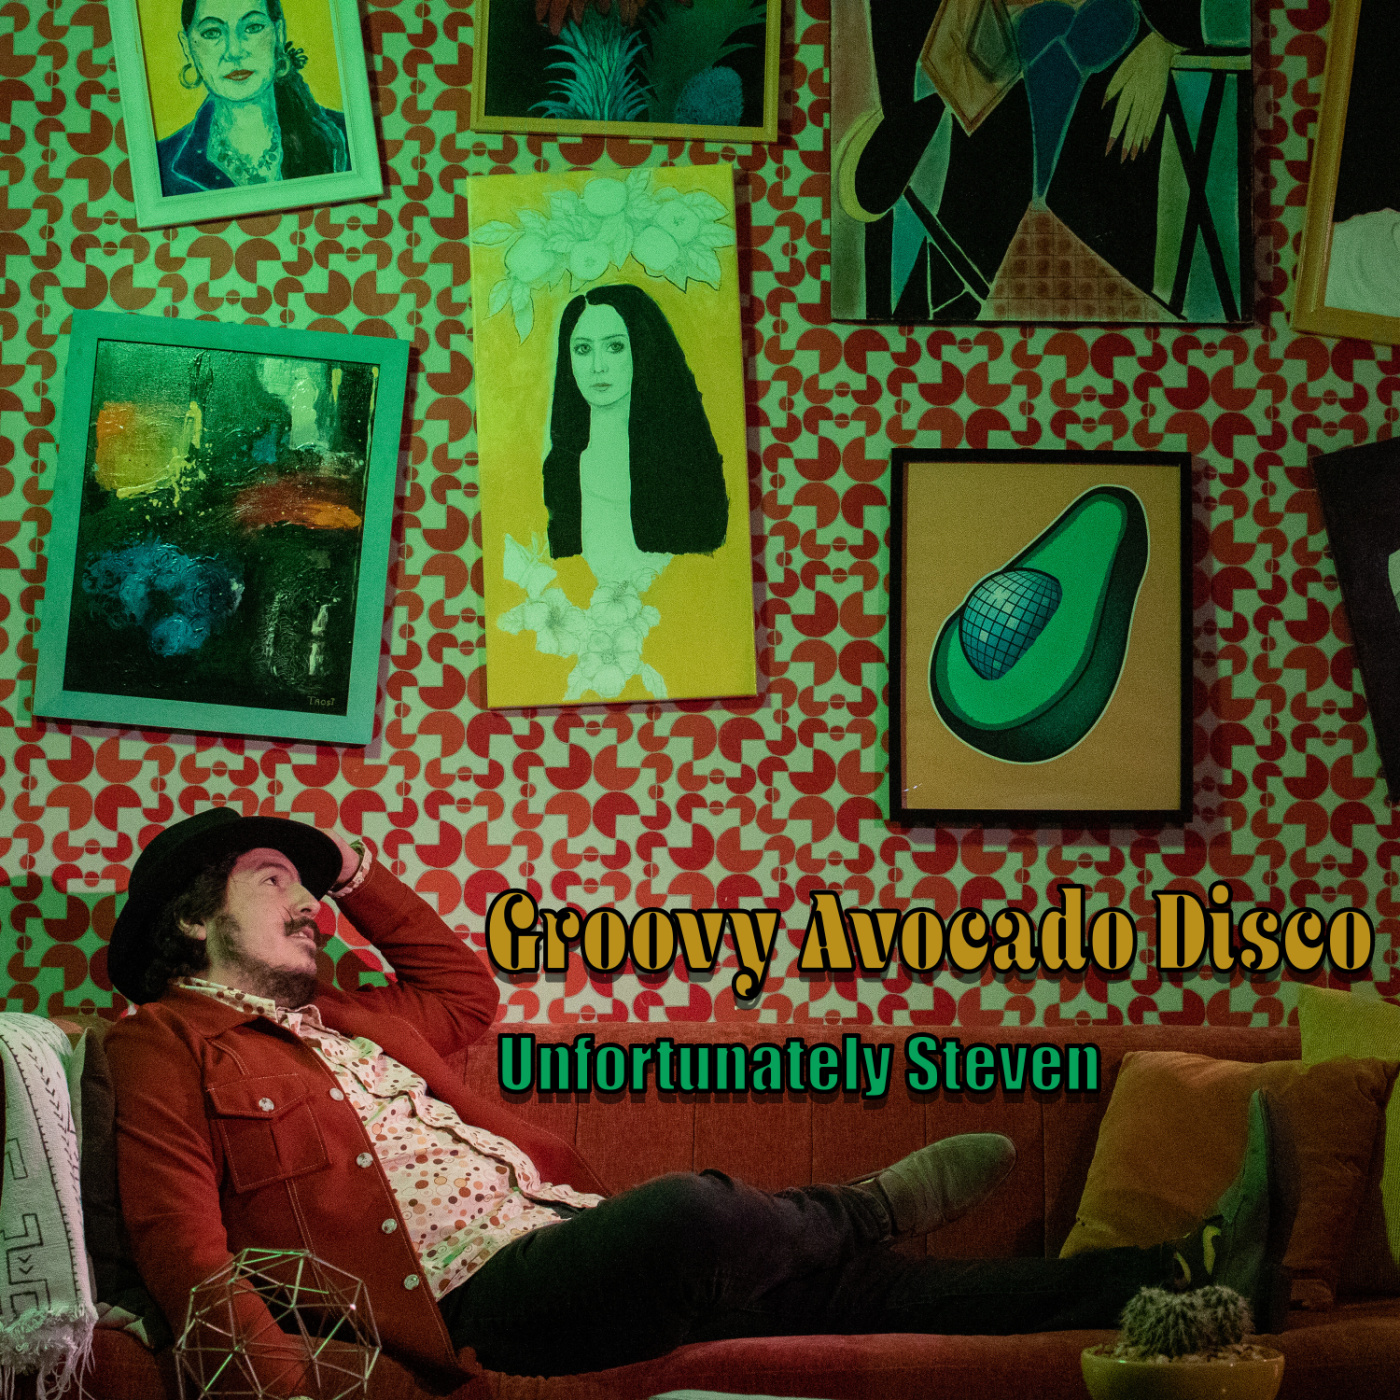 Unfortunately Steven - 'Groovy Avocado Disco' Review | Opinions | LIVING LIFE FEARLESS